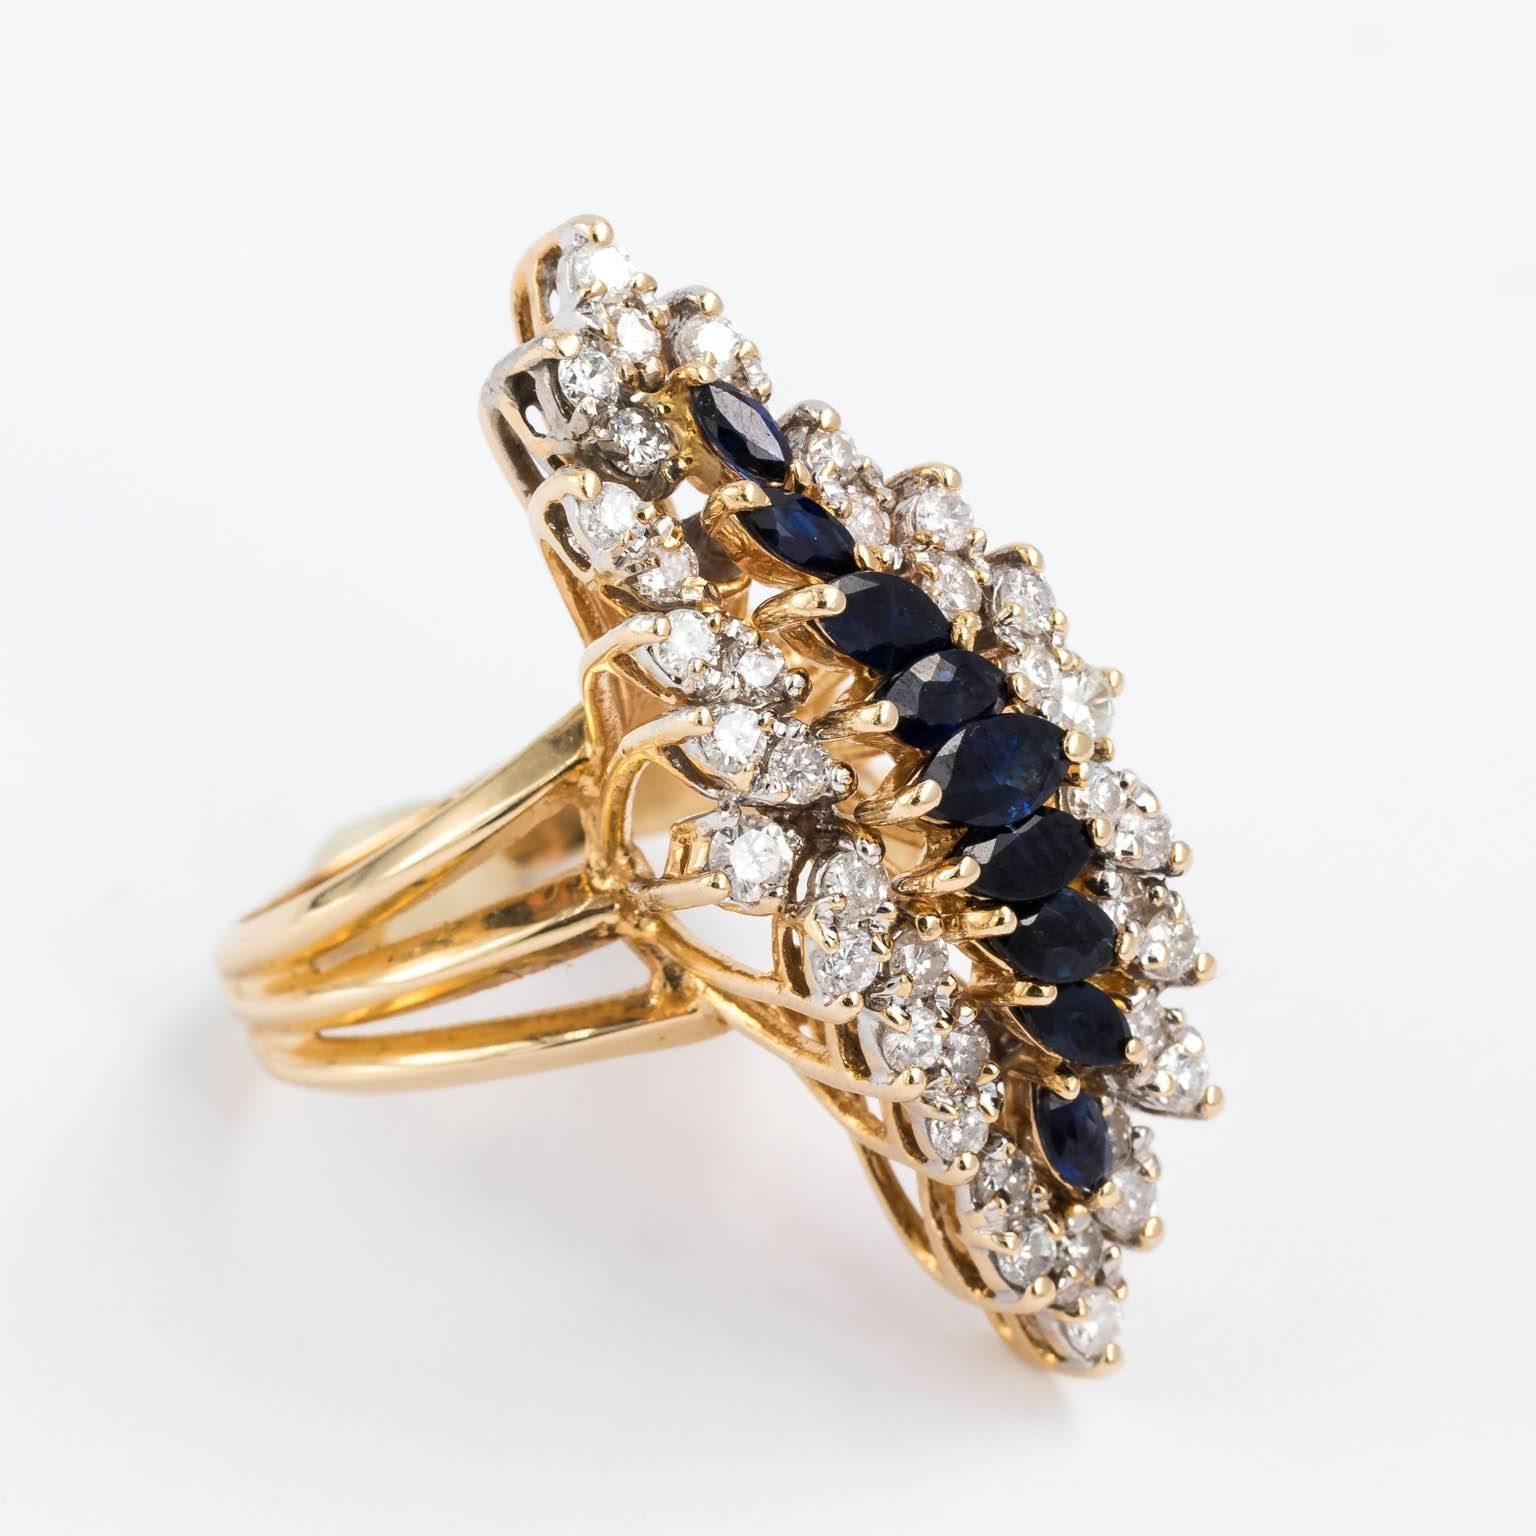 Circa 1970s statement ring made from high quality natural diamonds and sapphires. There are 36 2 mm or 3 points round brilliant cut diamonds, two 2.5 mm or 5 points round brilliant diamonds showcasing an array of marquise cut rich royal blue natural